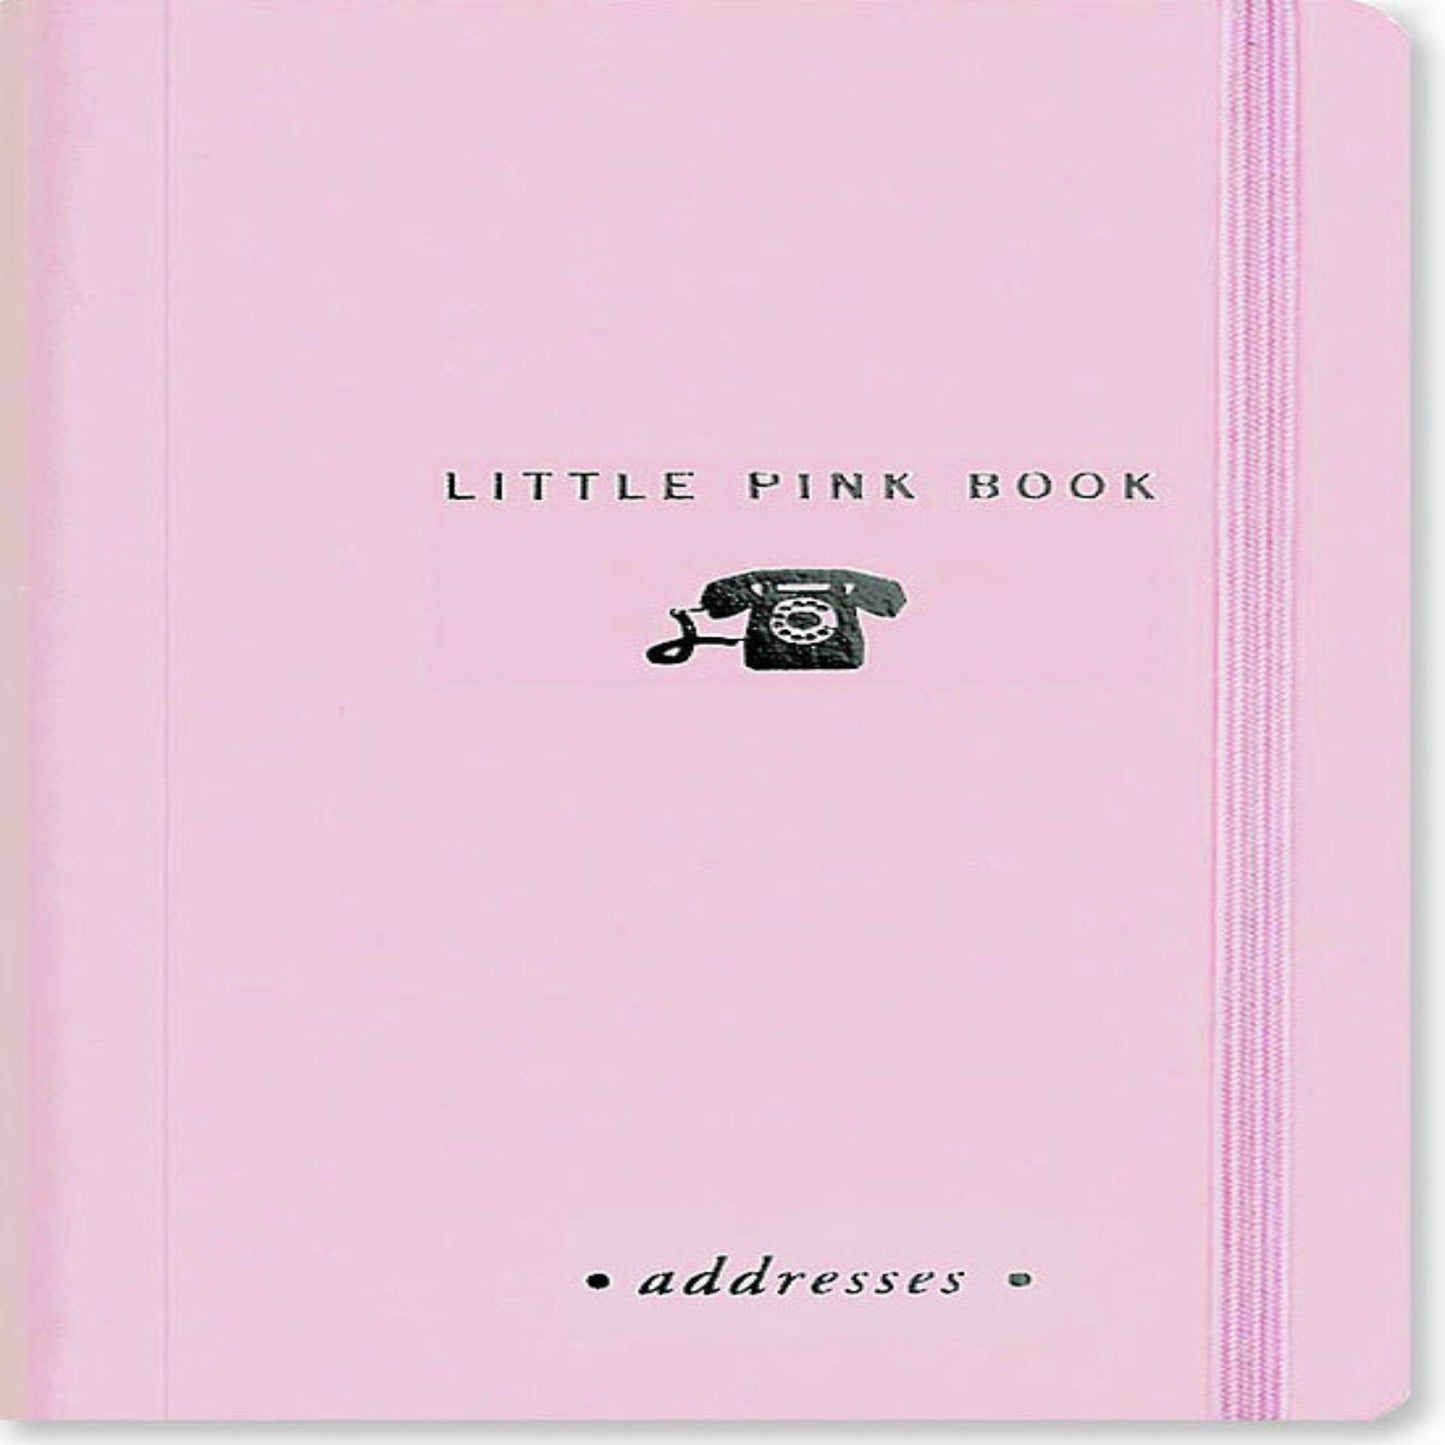 The Little Pink Book of Addresses